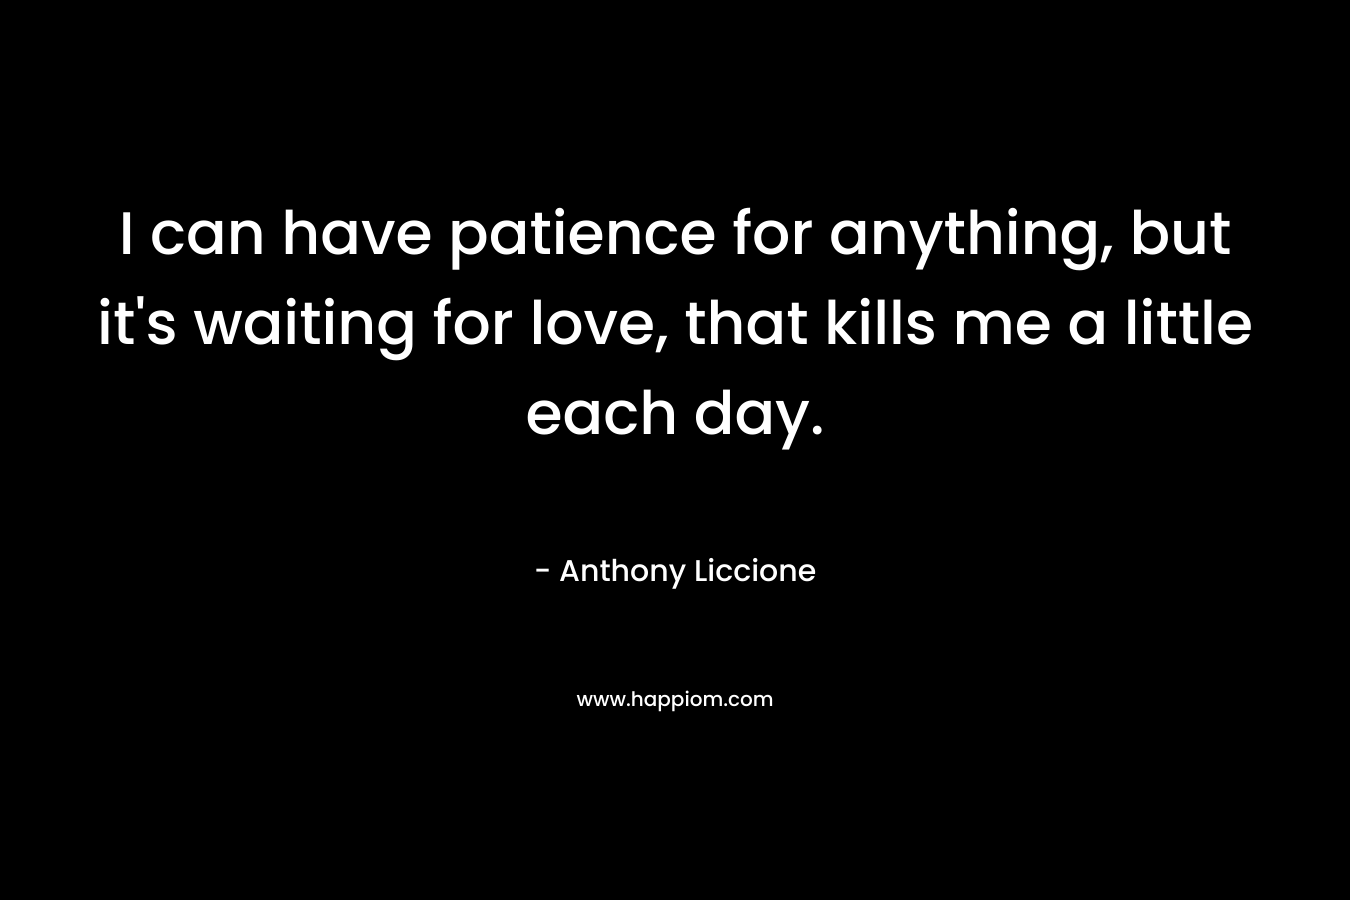 I can have patience for anything, but it's waiting for love, that kills me a little each day.